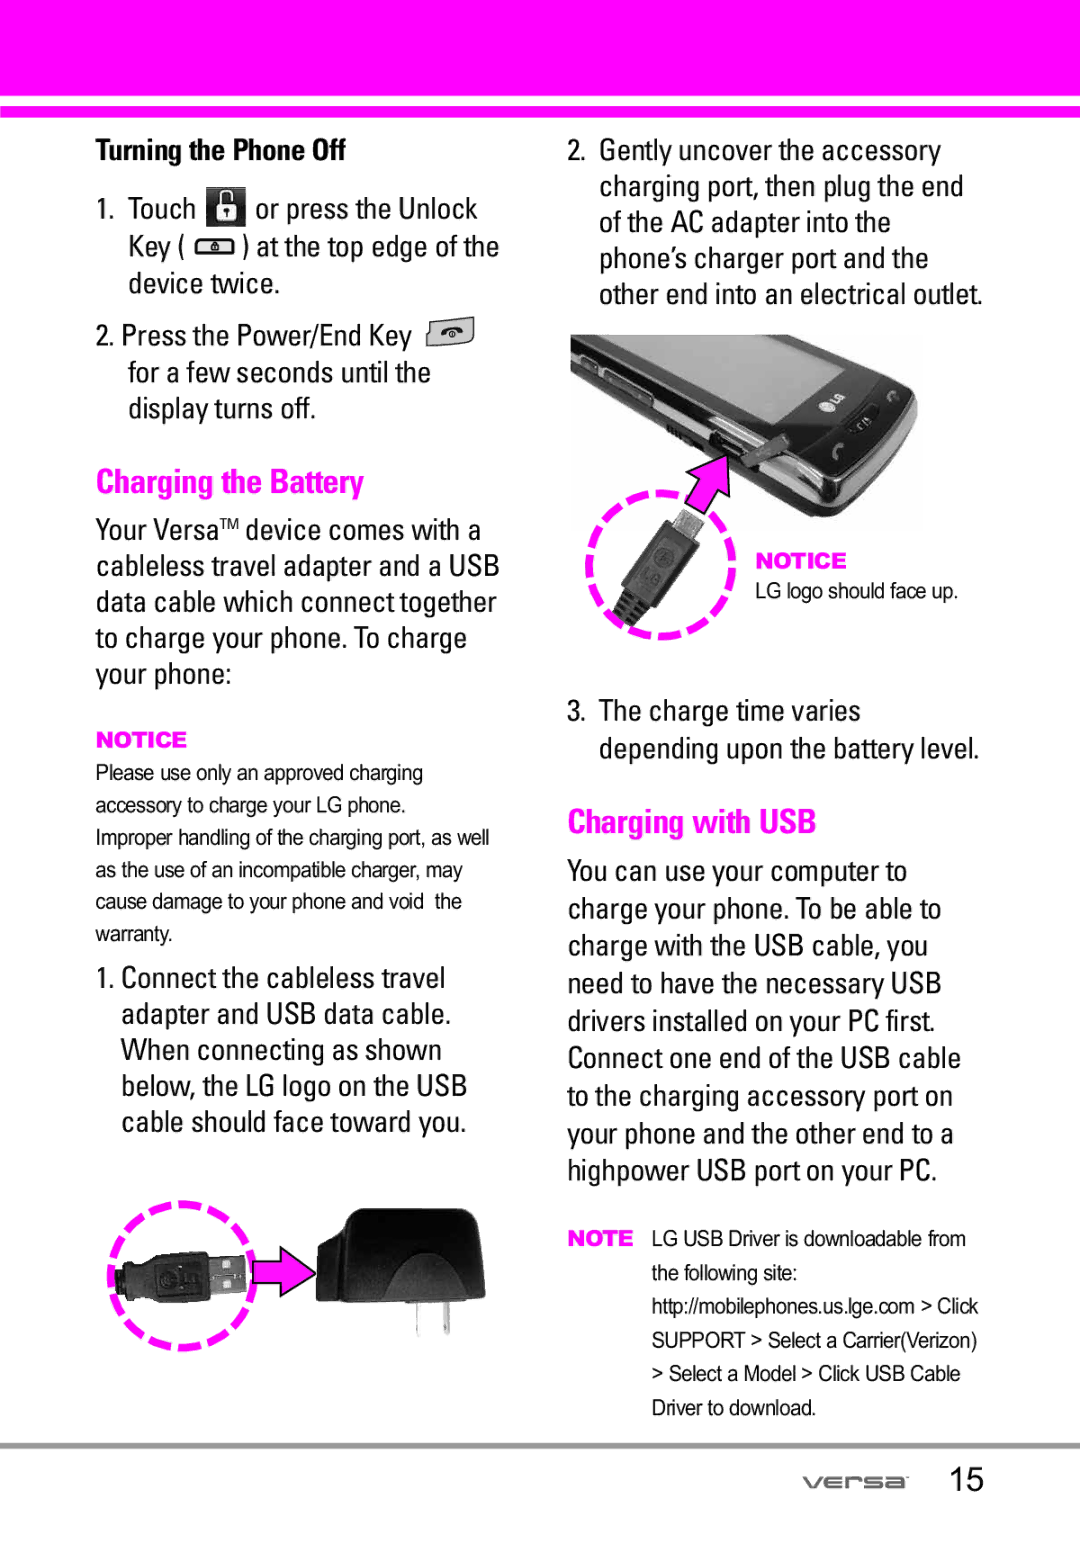 LG Electronics VX9600 manual Charging the Battery, Charging with USB, Turning the Phone Off 